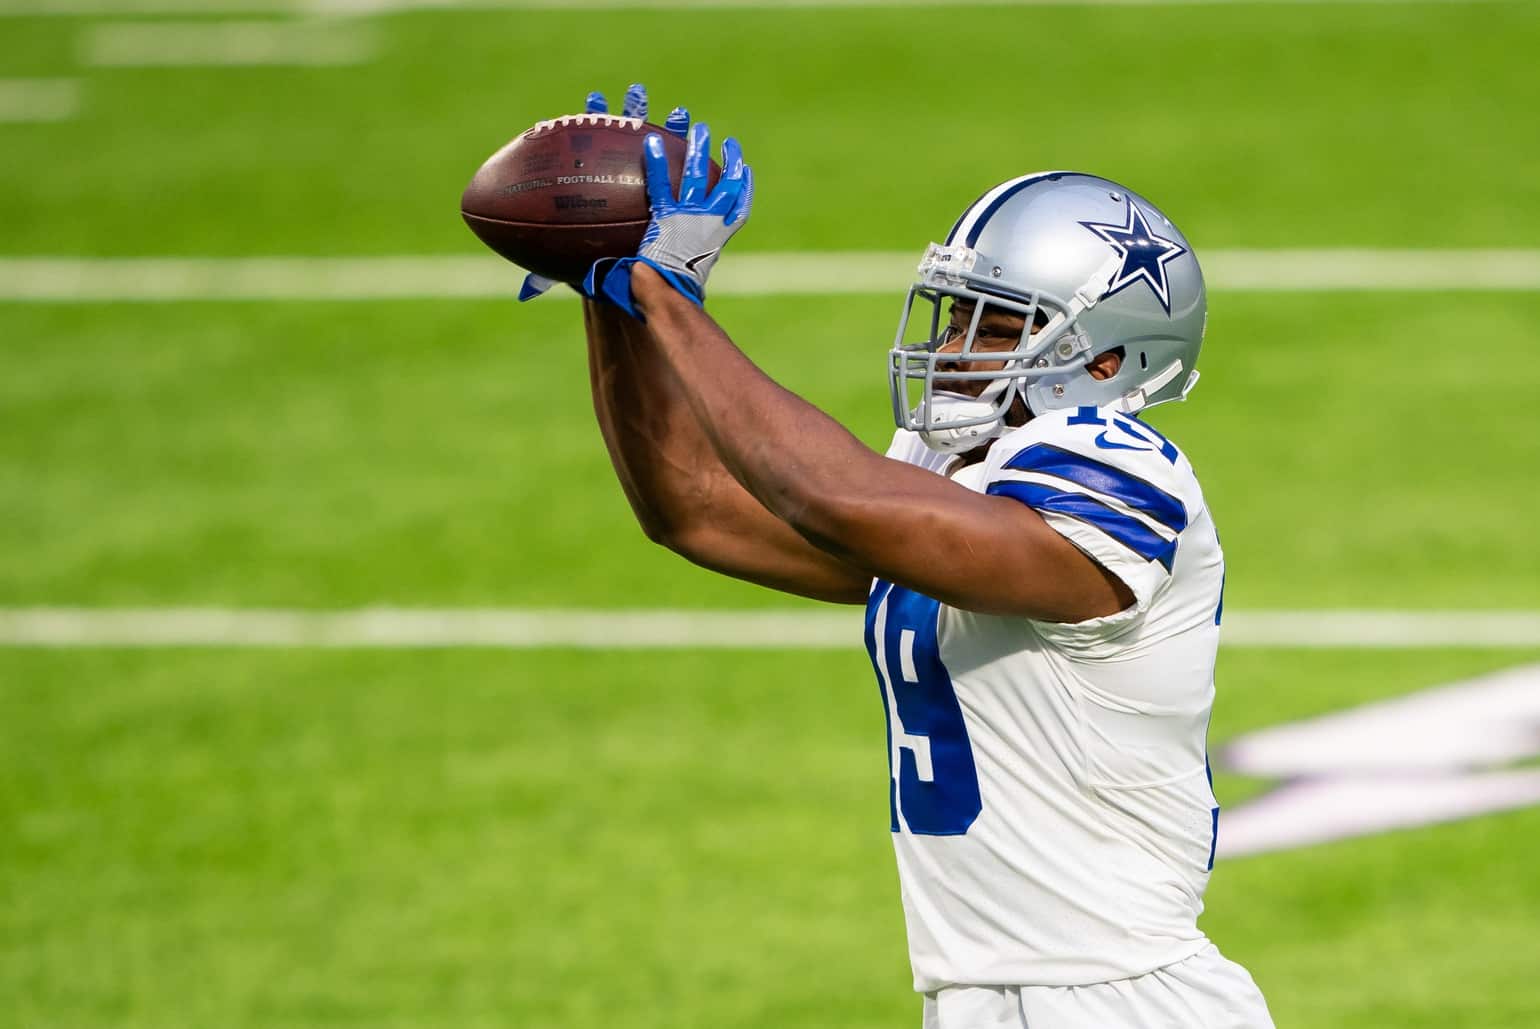 Cowboys receiver CeeDee Lamb projected contract extension and